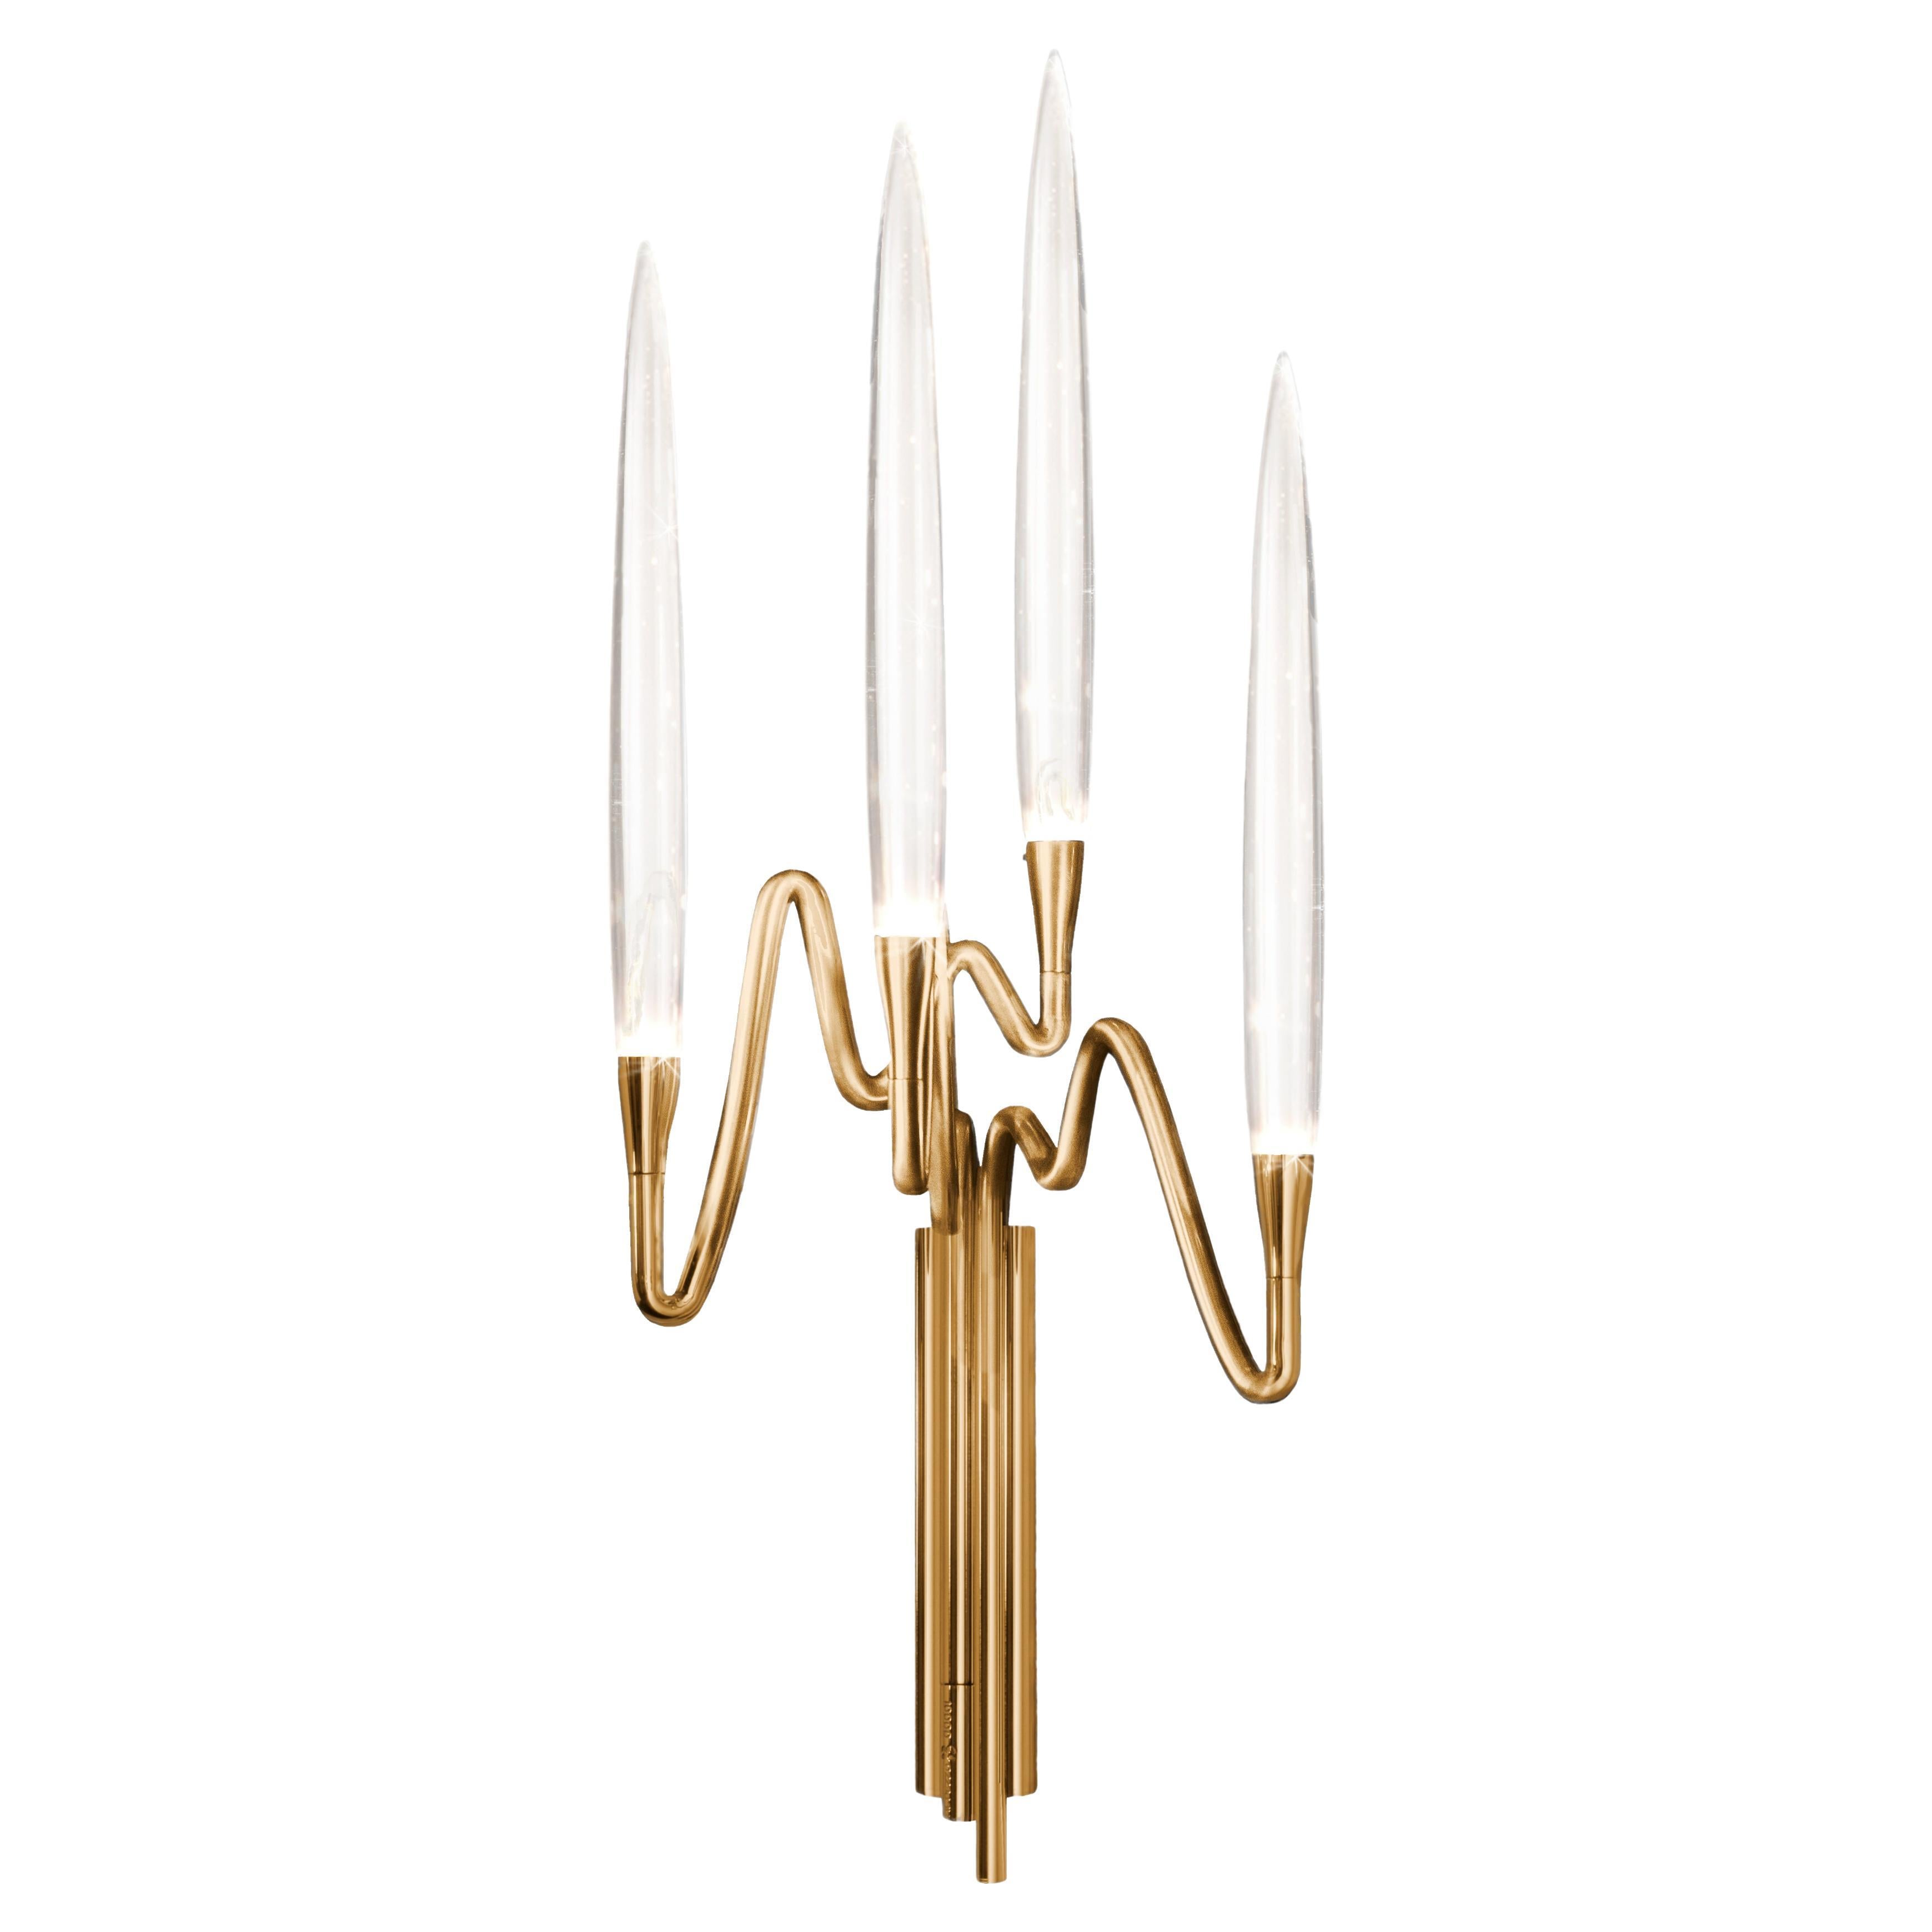 "Il Pezzo 3 Wall Sconce" - width 27cm/10.3" - polished brass - crystal - LEDs For Sale